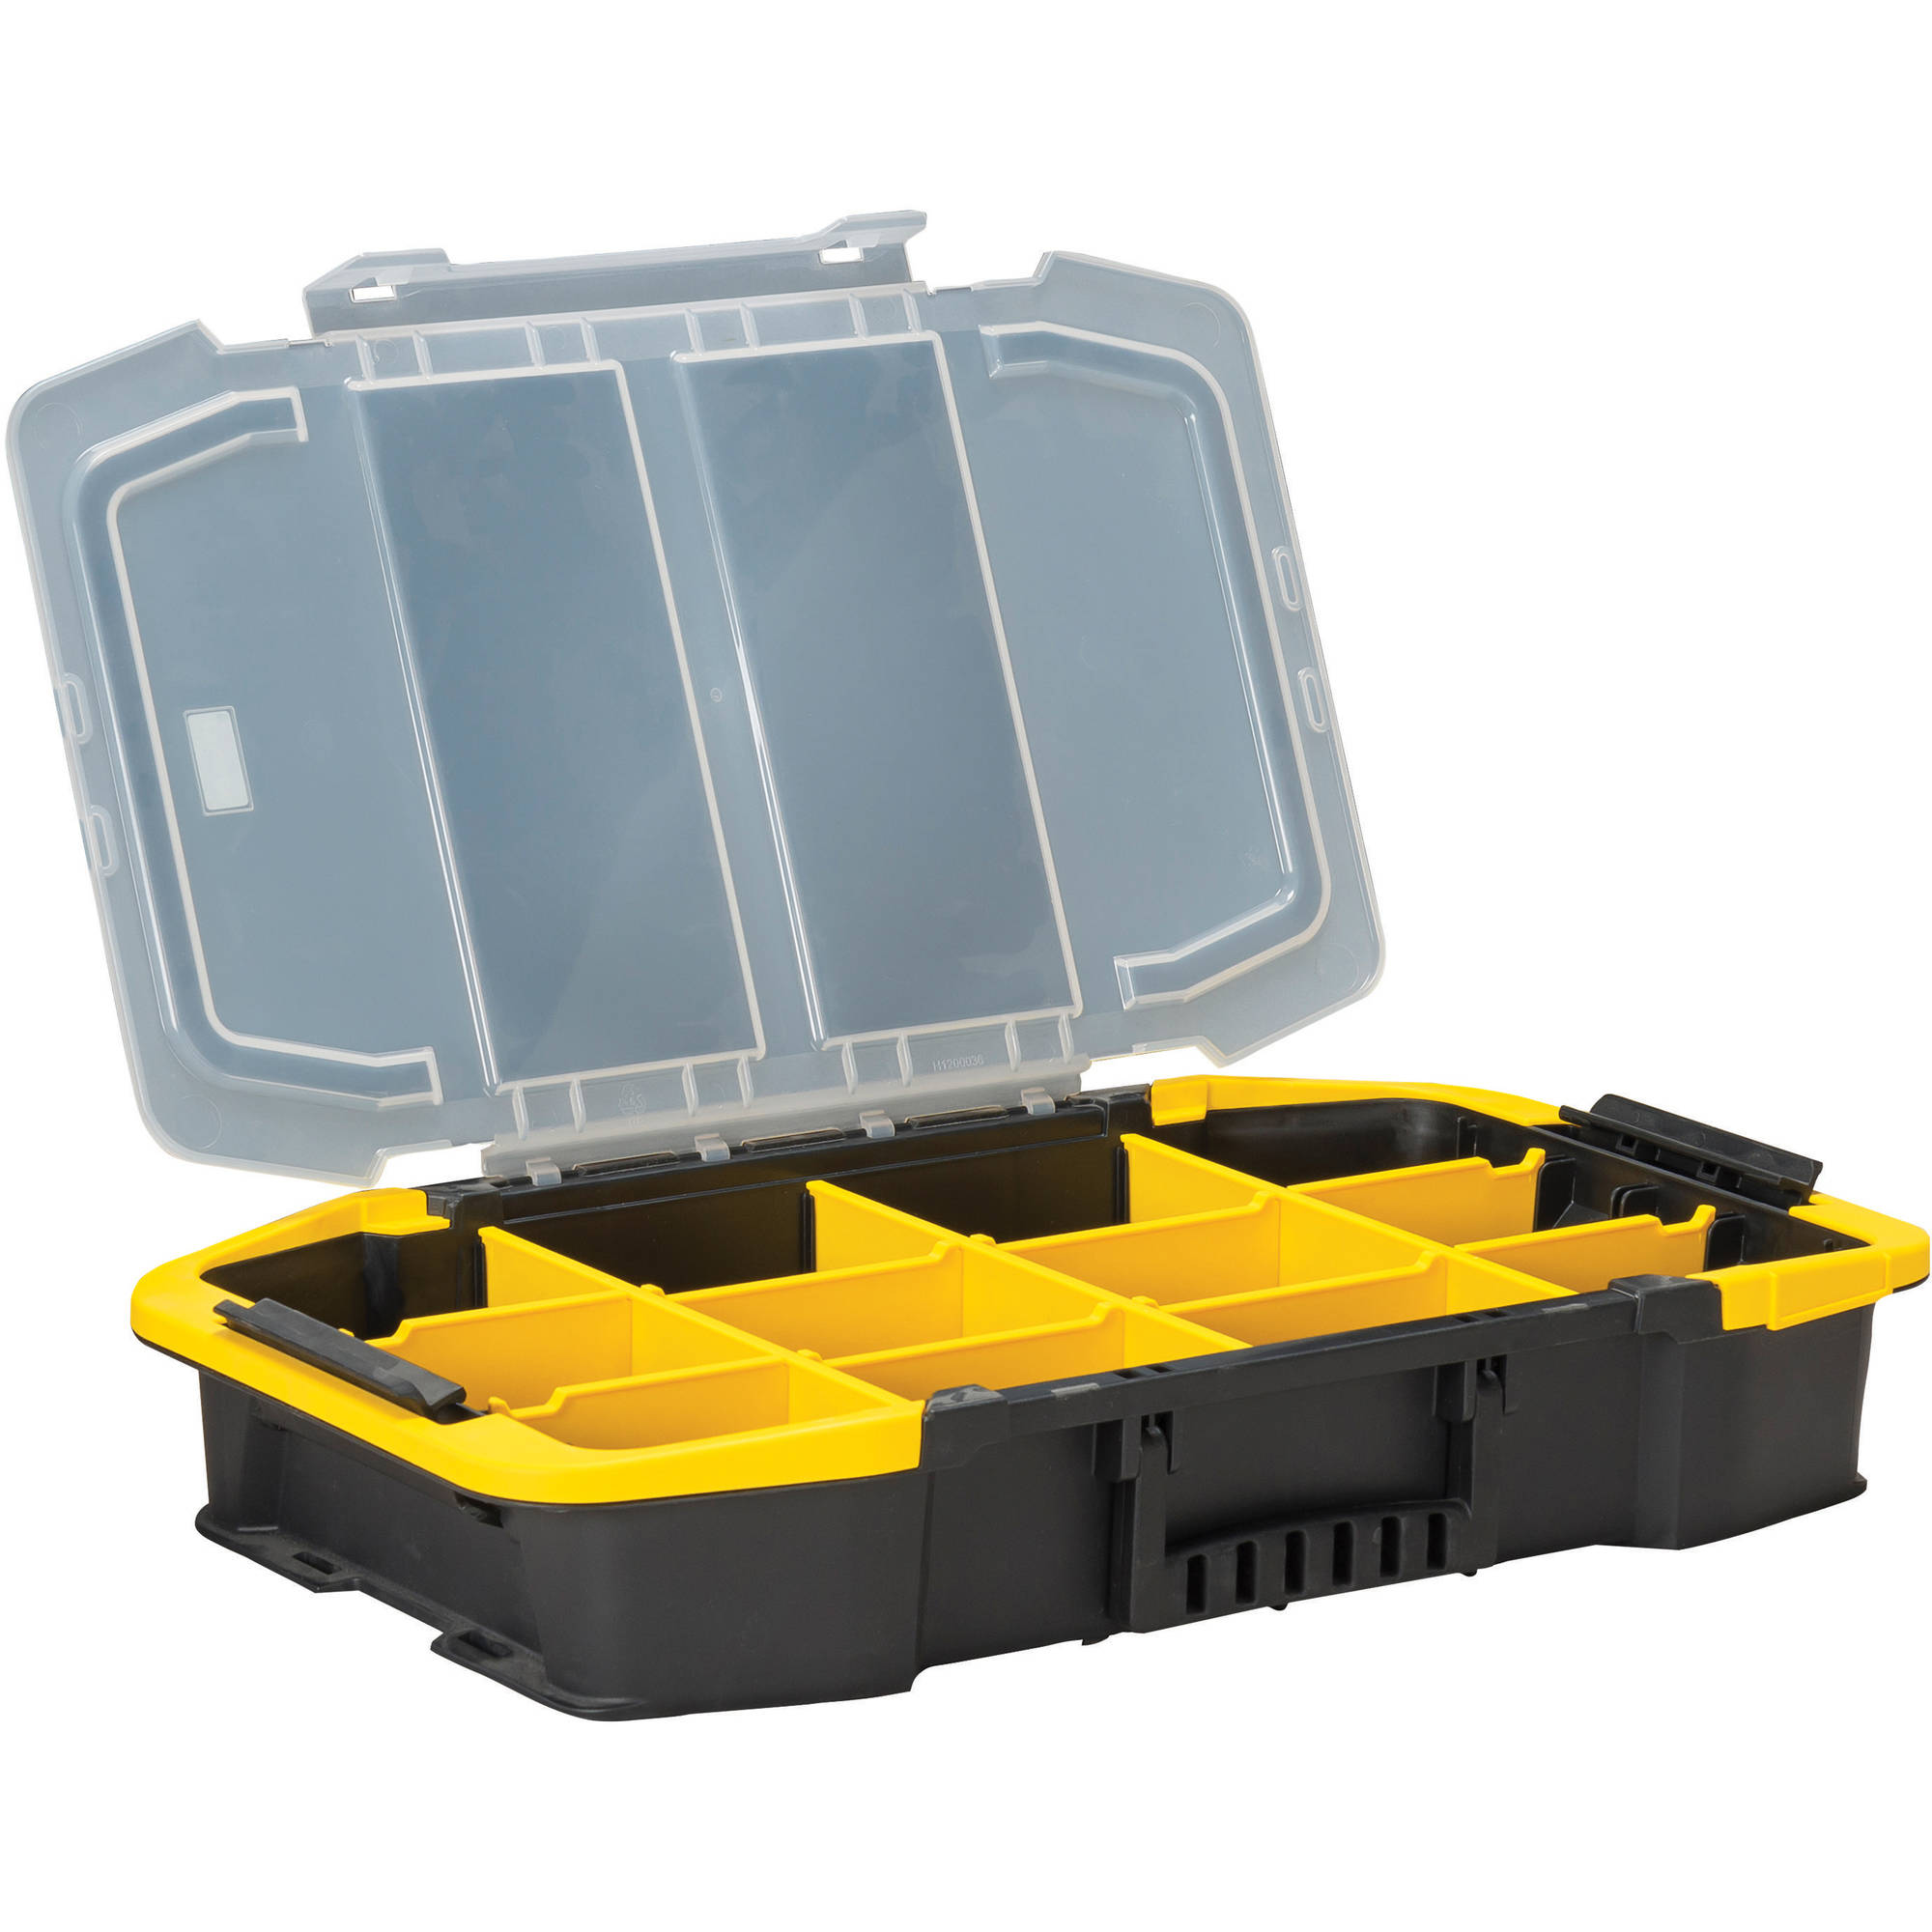 Stanley STST14440 Click-n-Connect Tool Organizer Tool Box - image 2 of 3